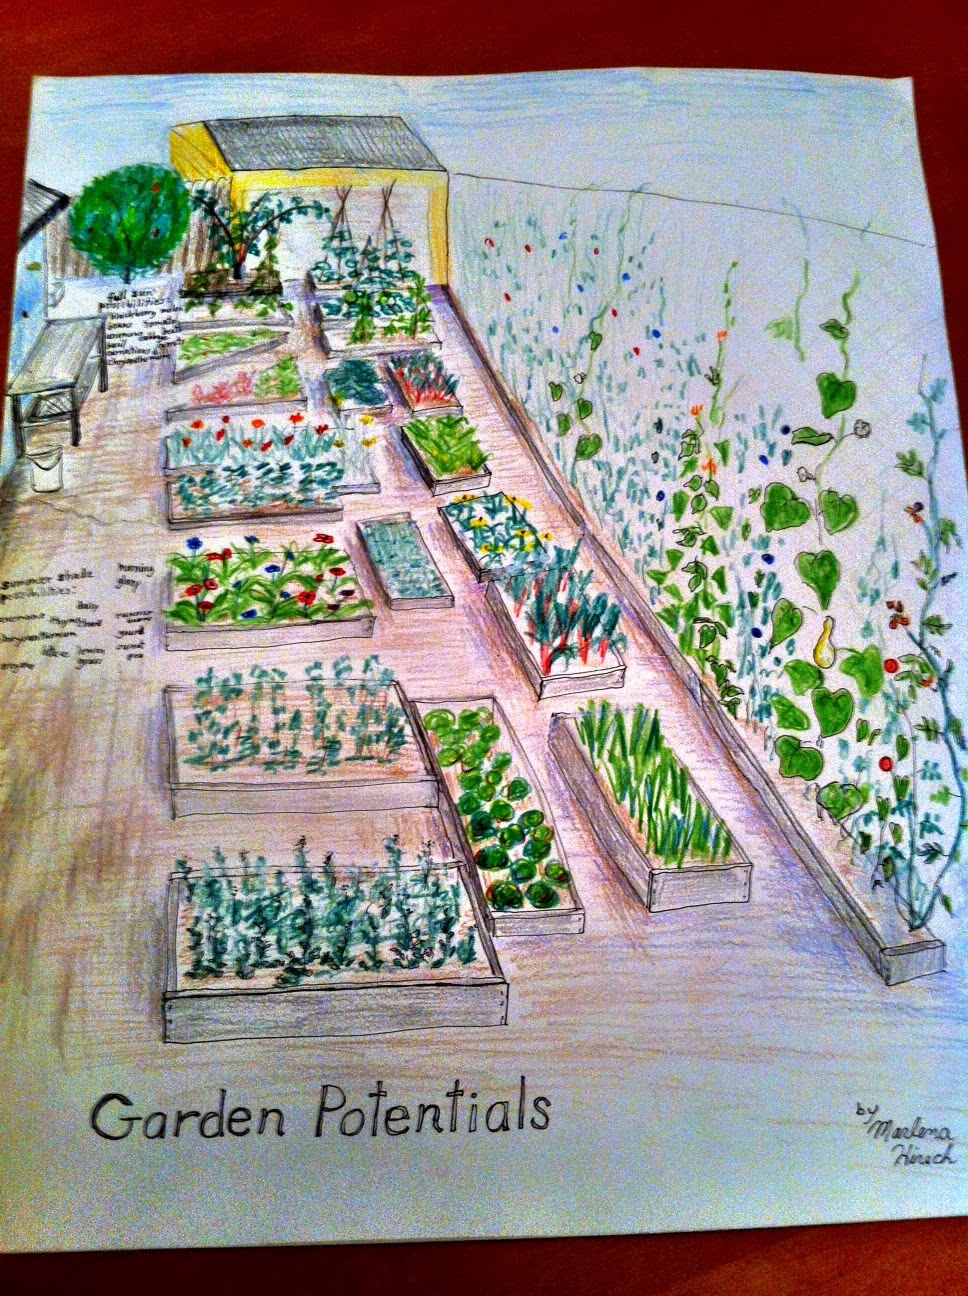 A Vision for the Lewis Garden